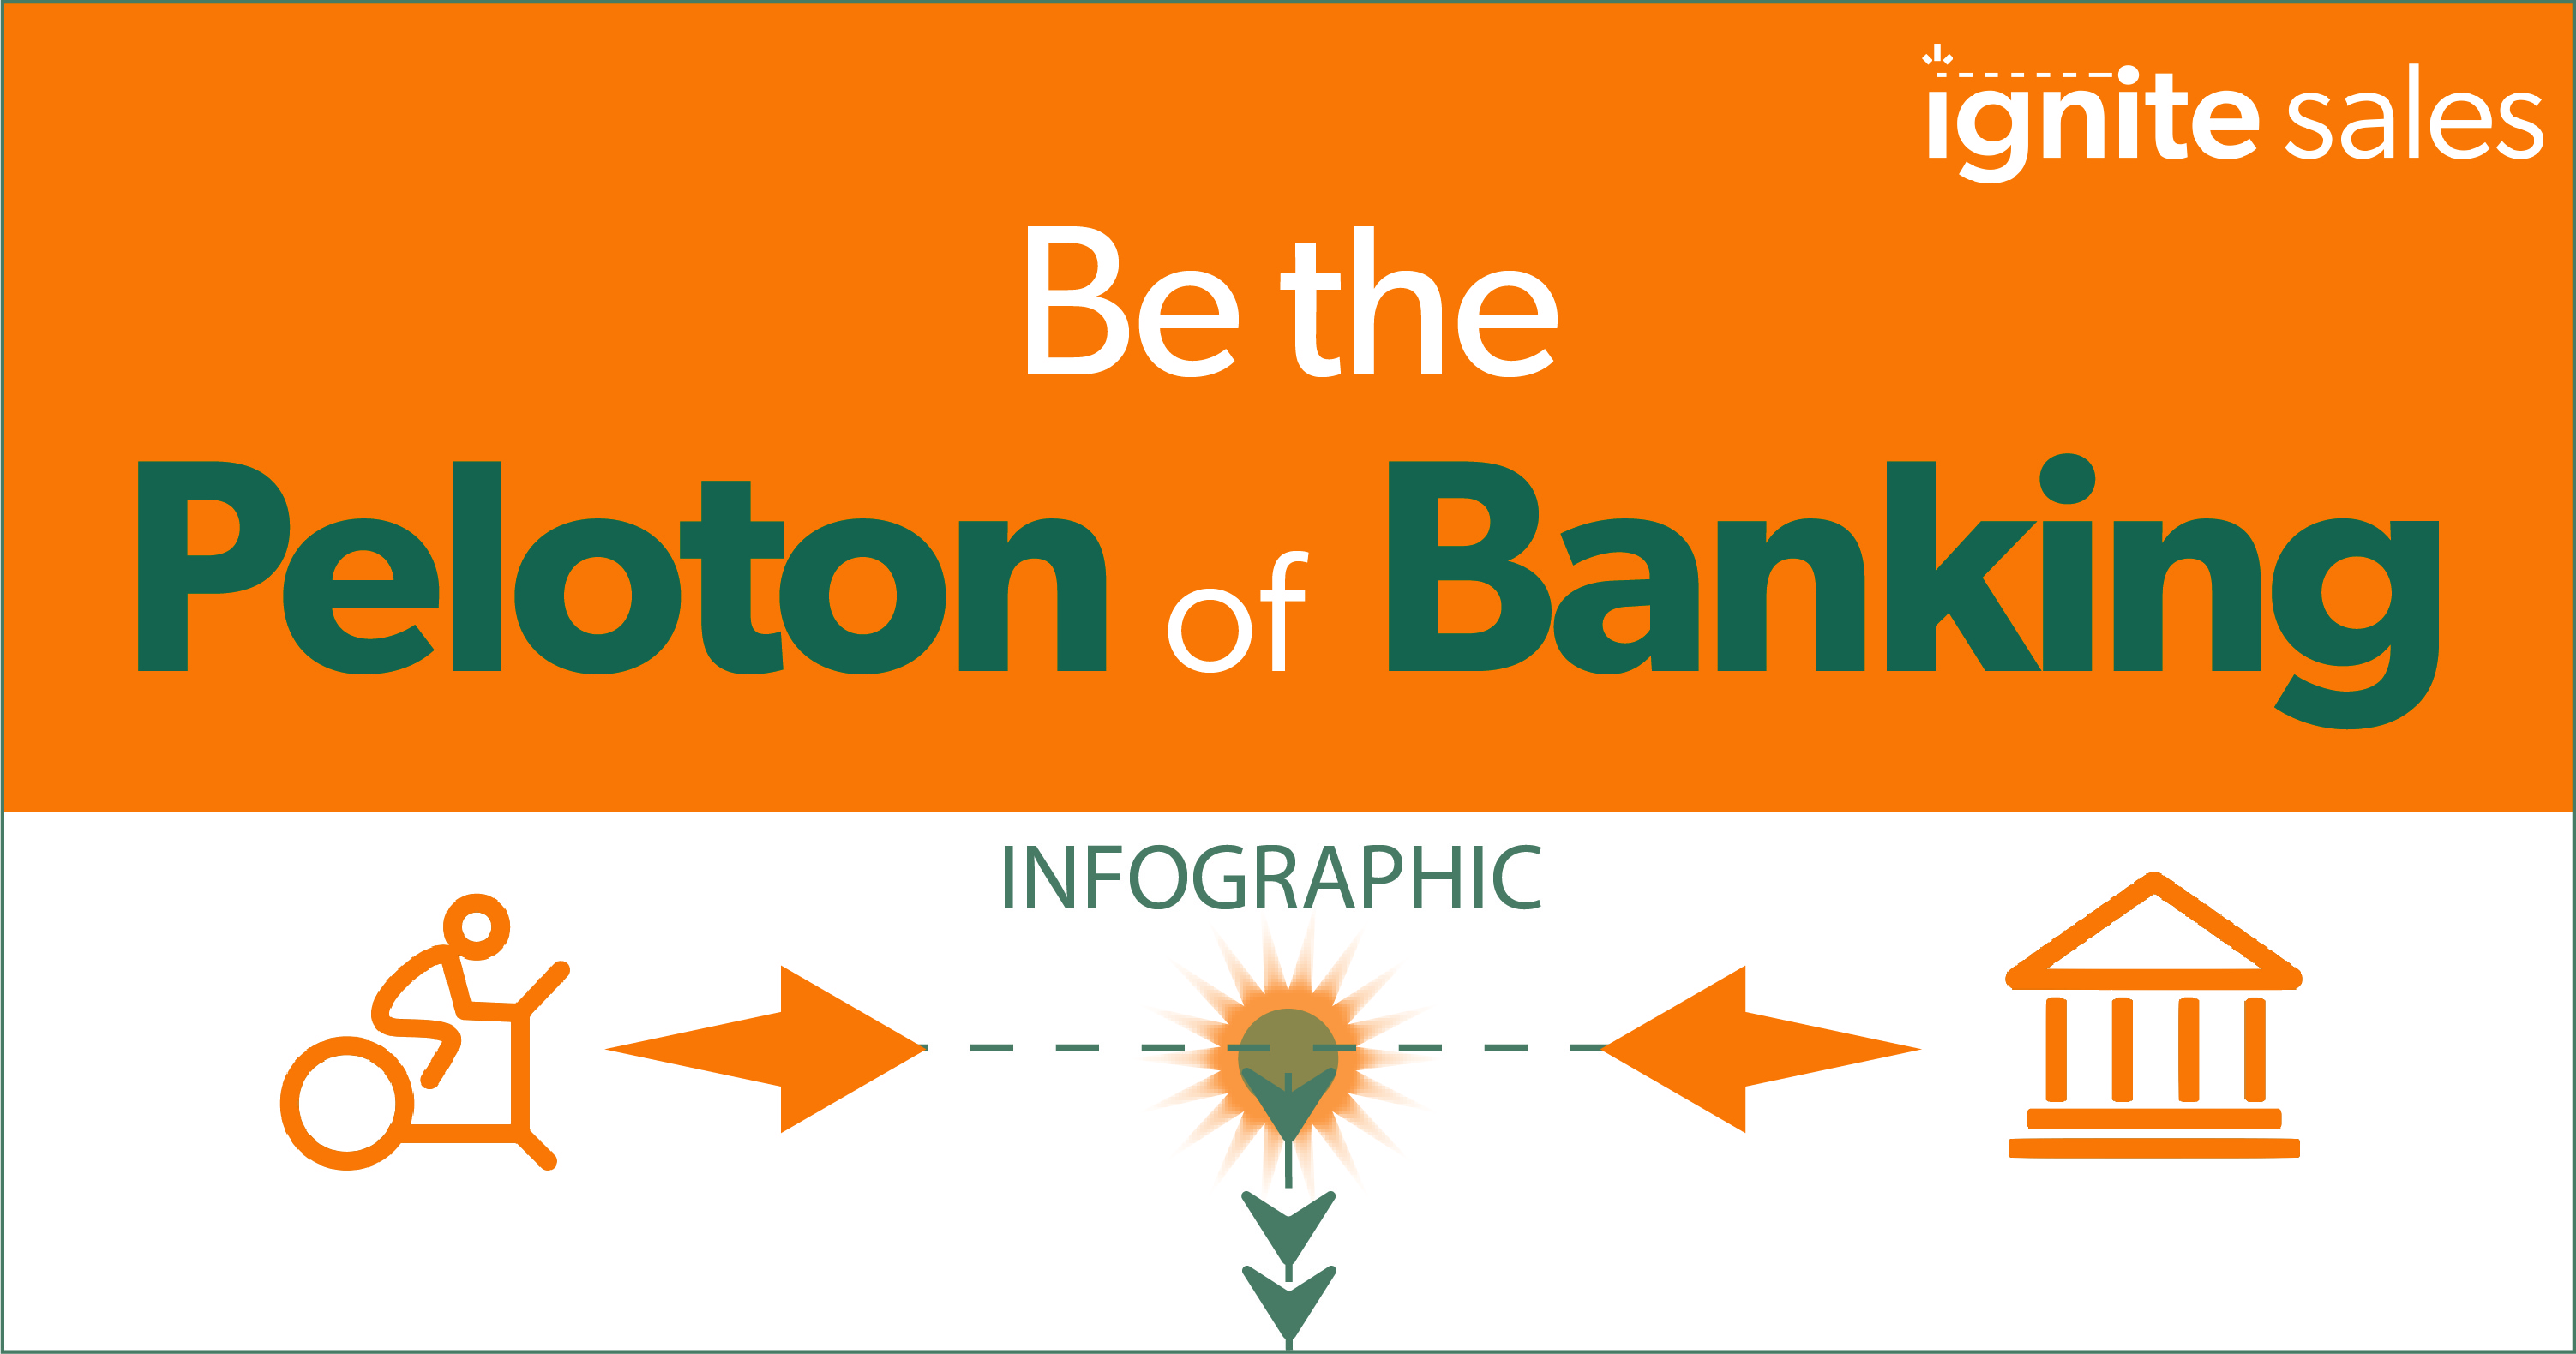 Peloton banking cropped Infographic-new